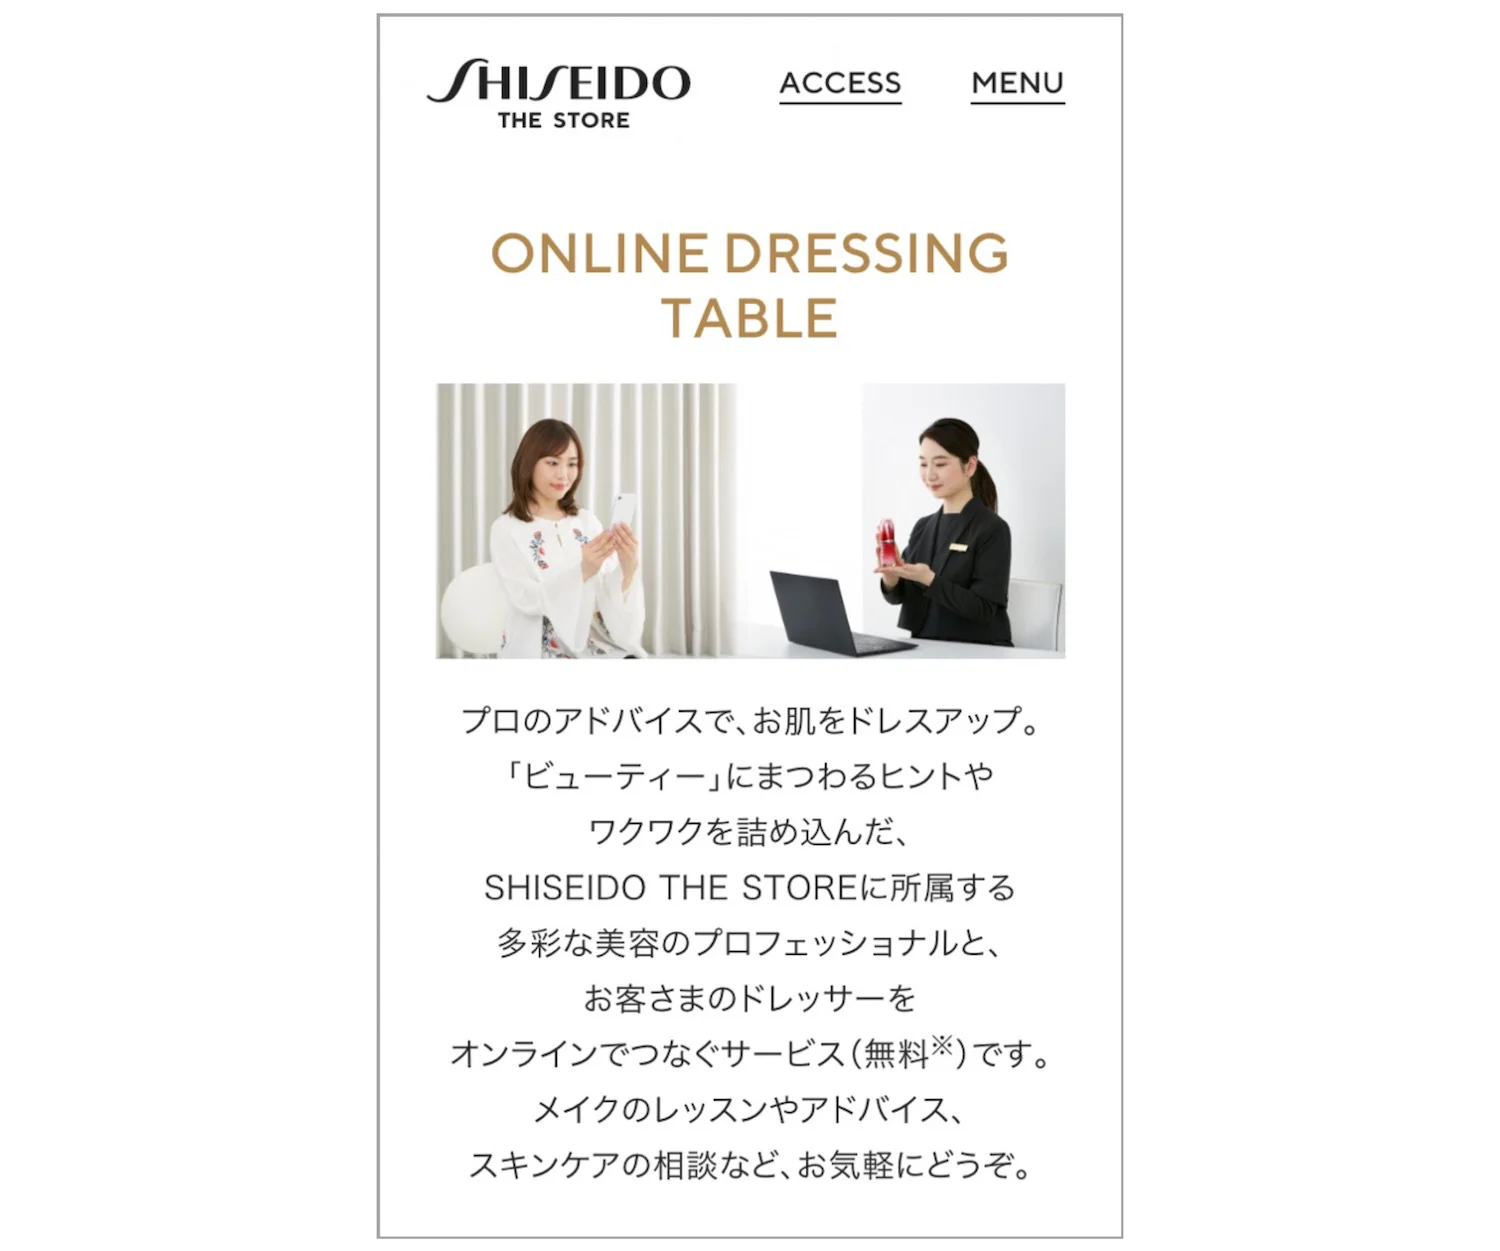 ONLINE DRESSING TABLE ウェウサイト画面